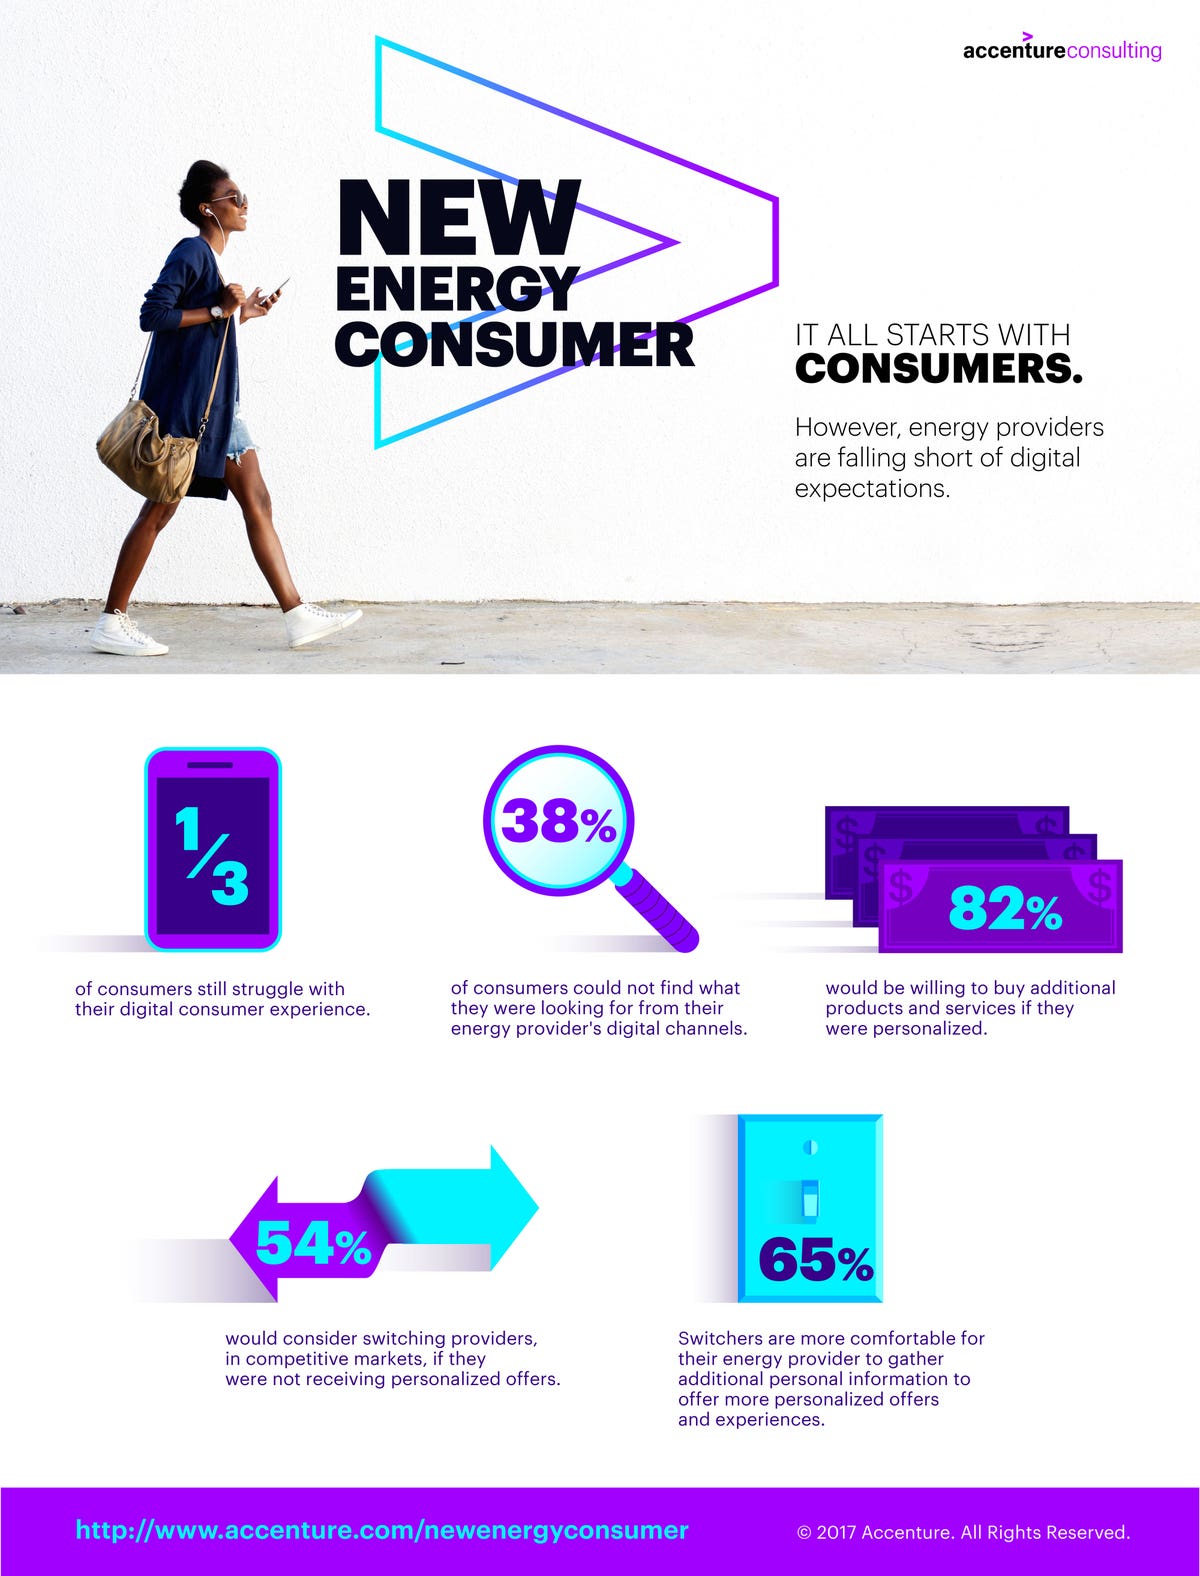 Most Traditional Energy Retail Utilities Lag Disruptor Brands in Delivering  Customer Experience, Accenture Research Finds